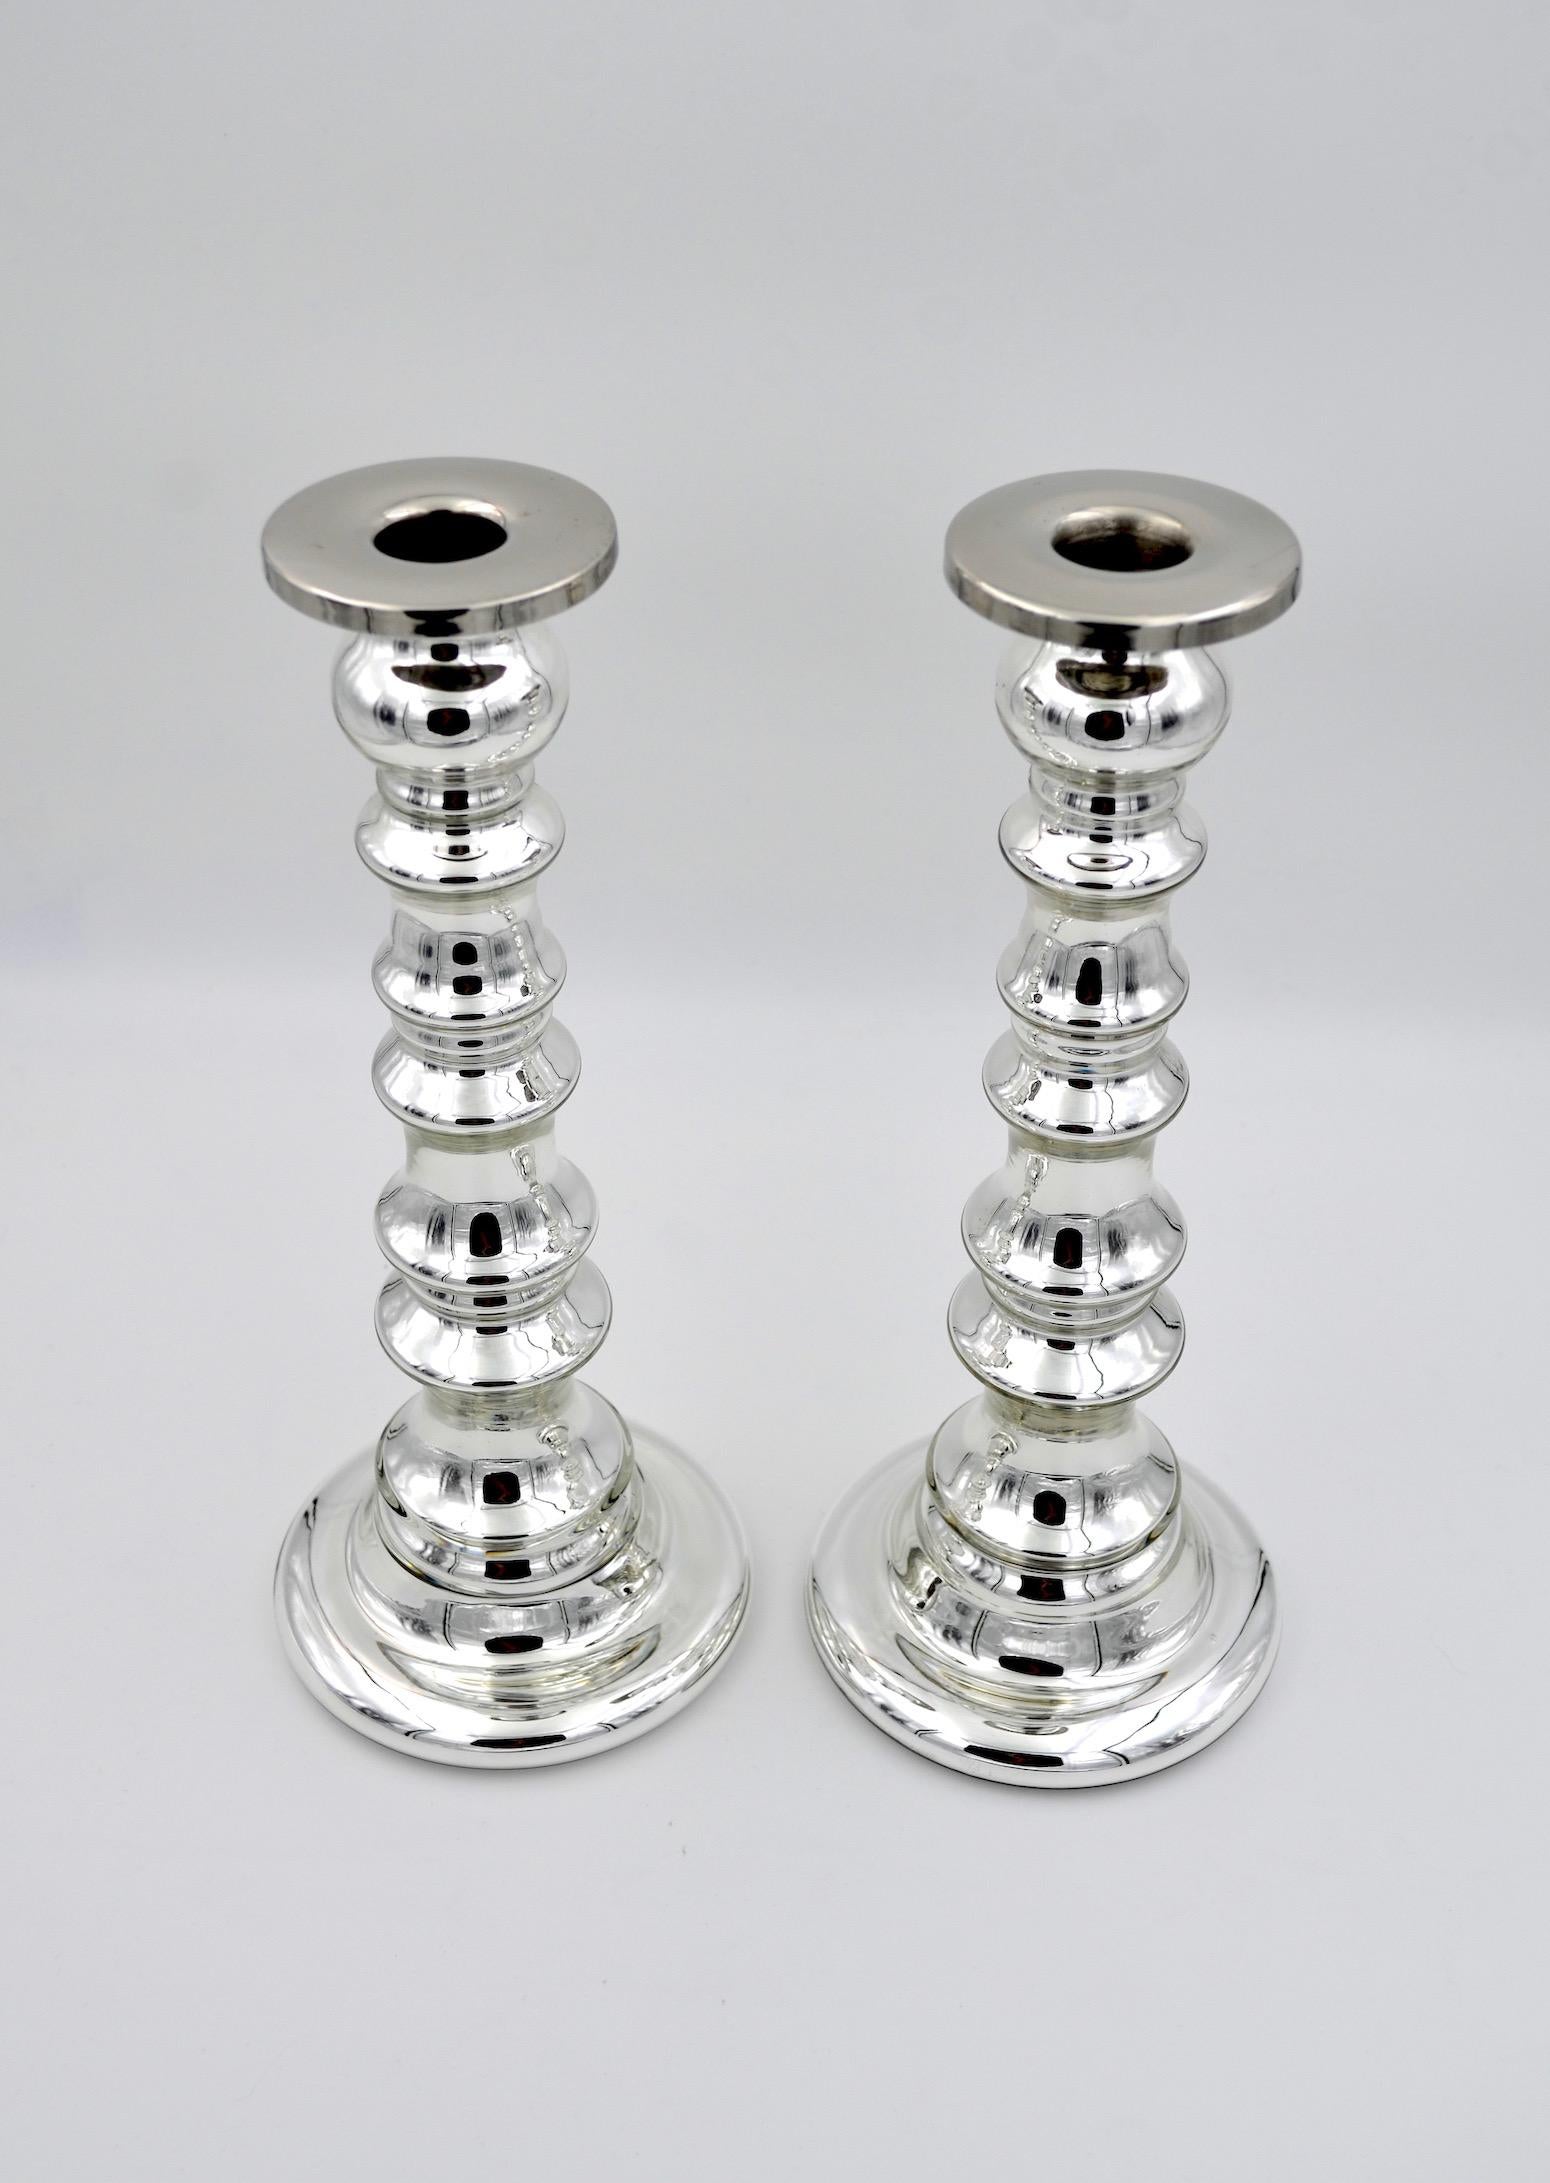 A tall and sculptural pair of vintage candlesticks in silvered mercury glass with metal candle cups. The silvered glass candle holders are a perfect finishing touch to any Art Deco or Hollywood Regency interior decor scheme. 

The stem of each